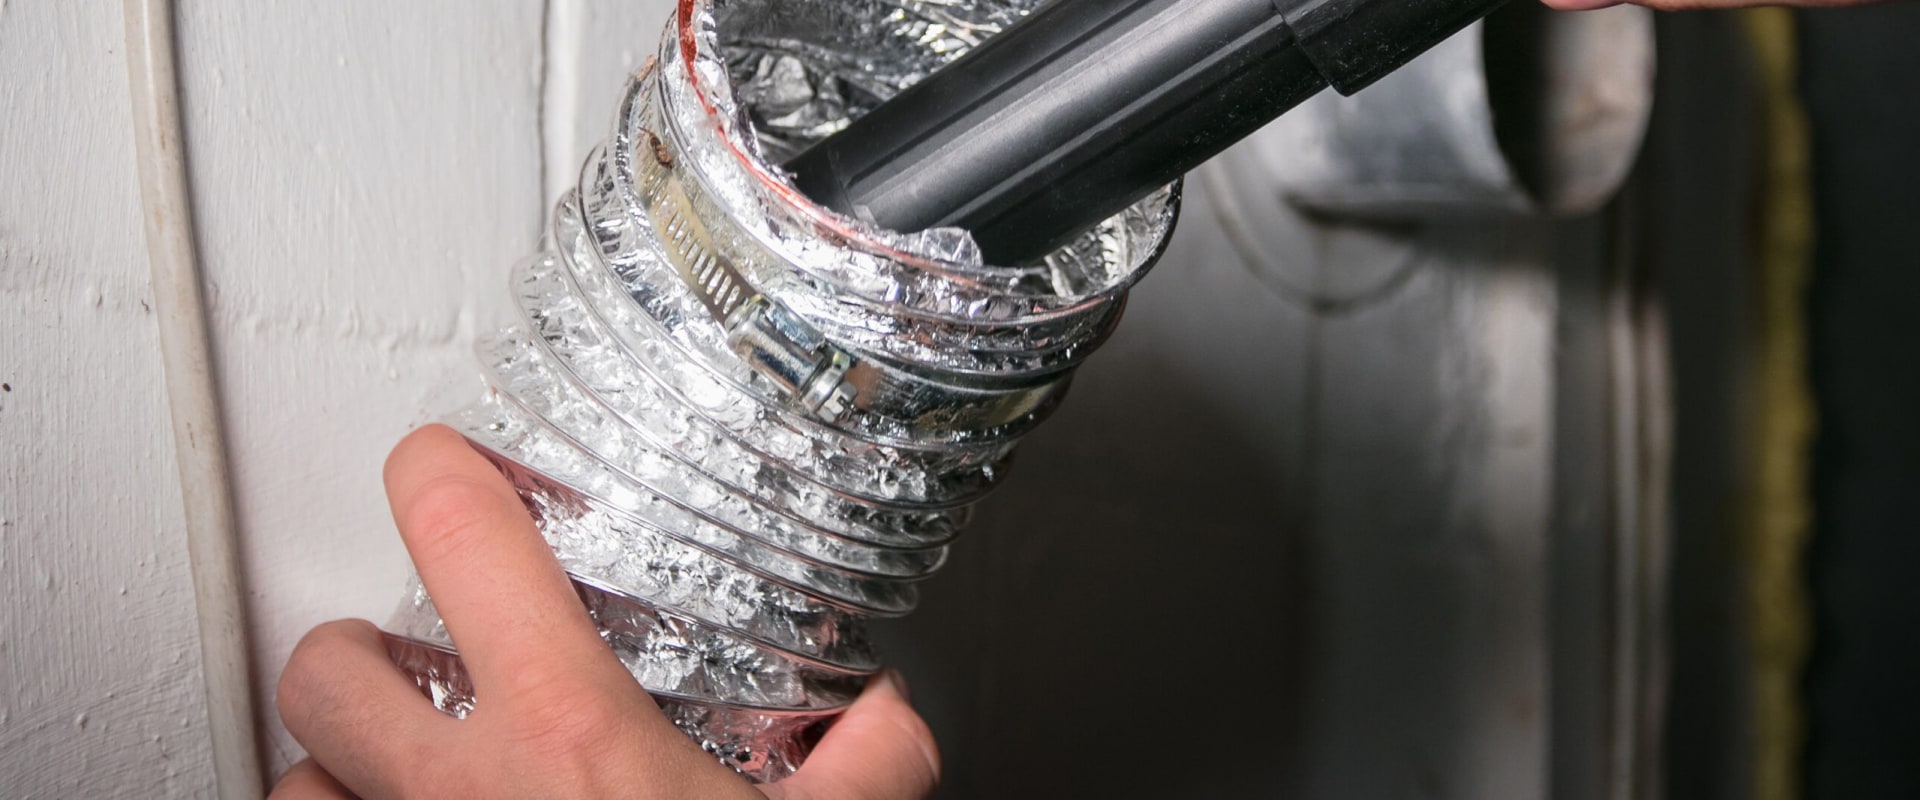 What Type of Warranty Do Professional Dryer Vent Cleaning Services Offer?